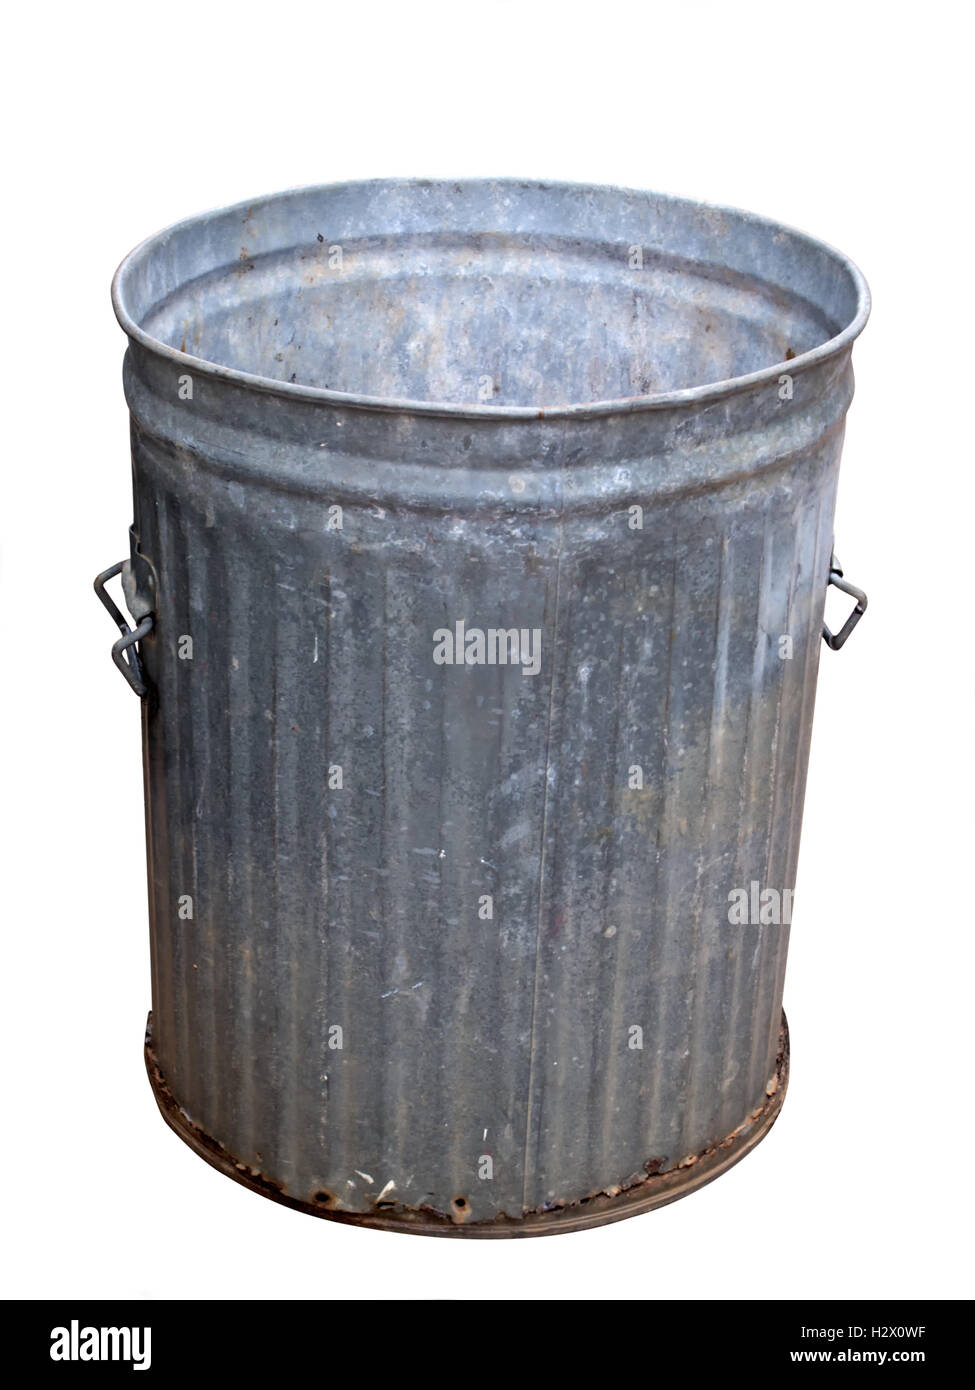 domestic garbage can Stock Photo